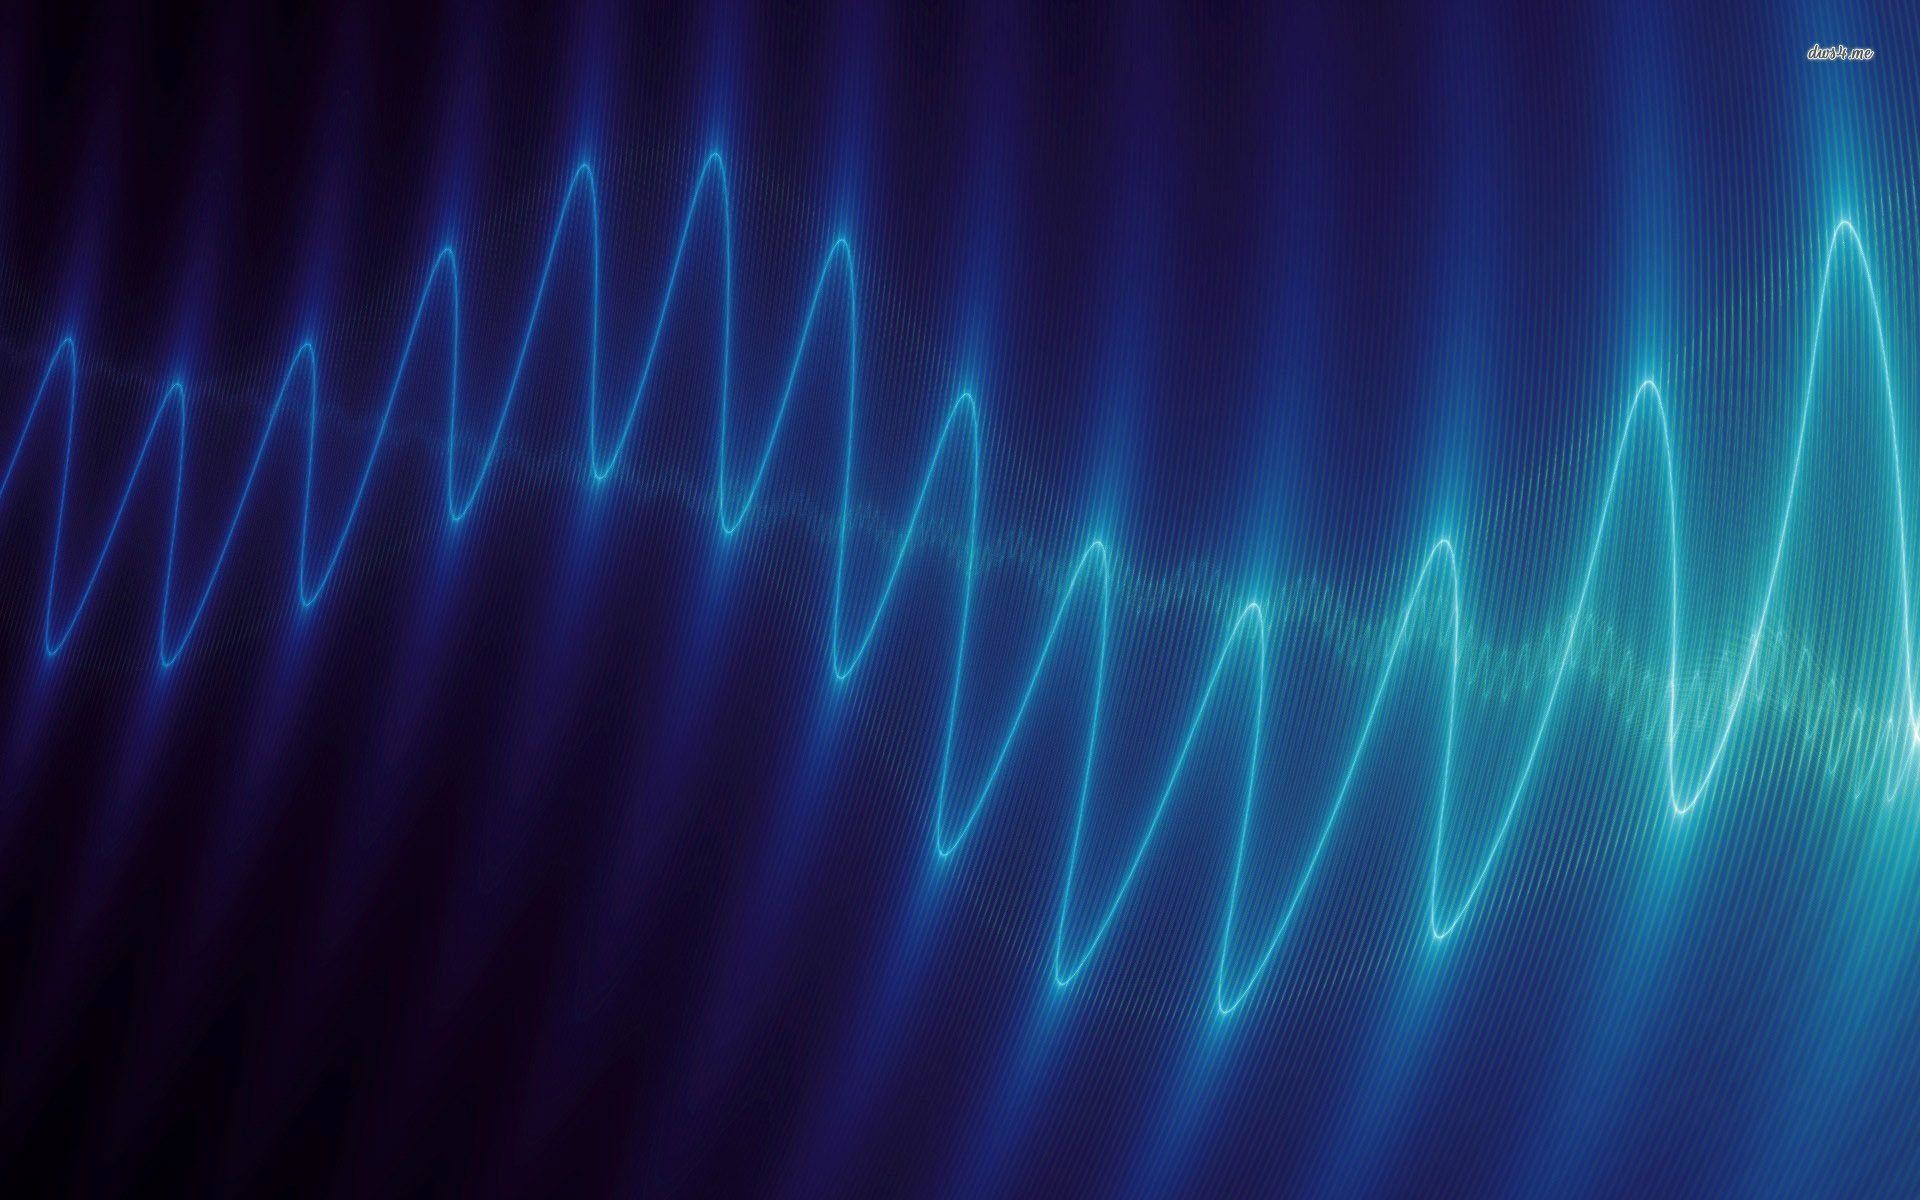 1920x1200 PreviousNext. Previous Image Next Image. wallpapers for blue sound waves  wallpaper